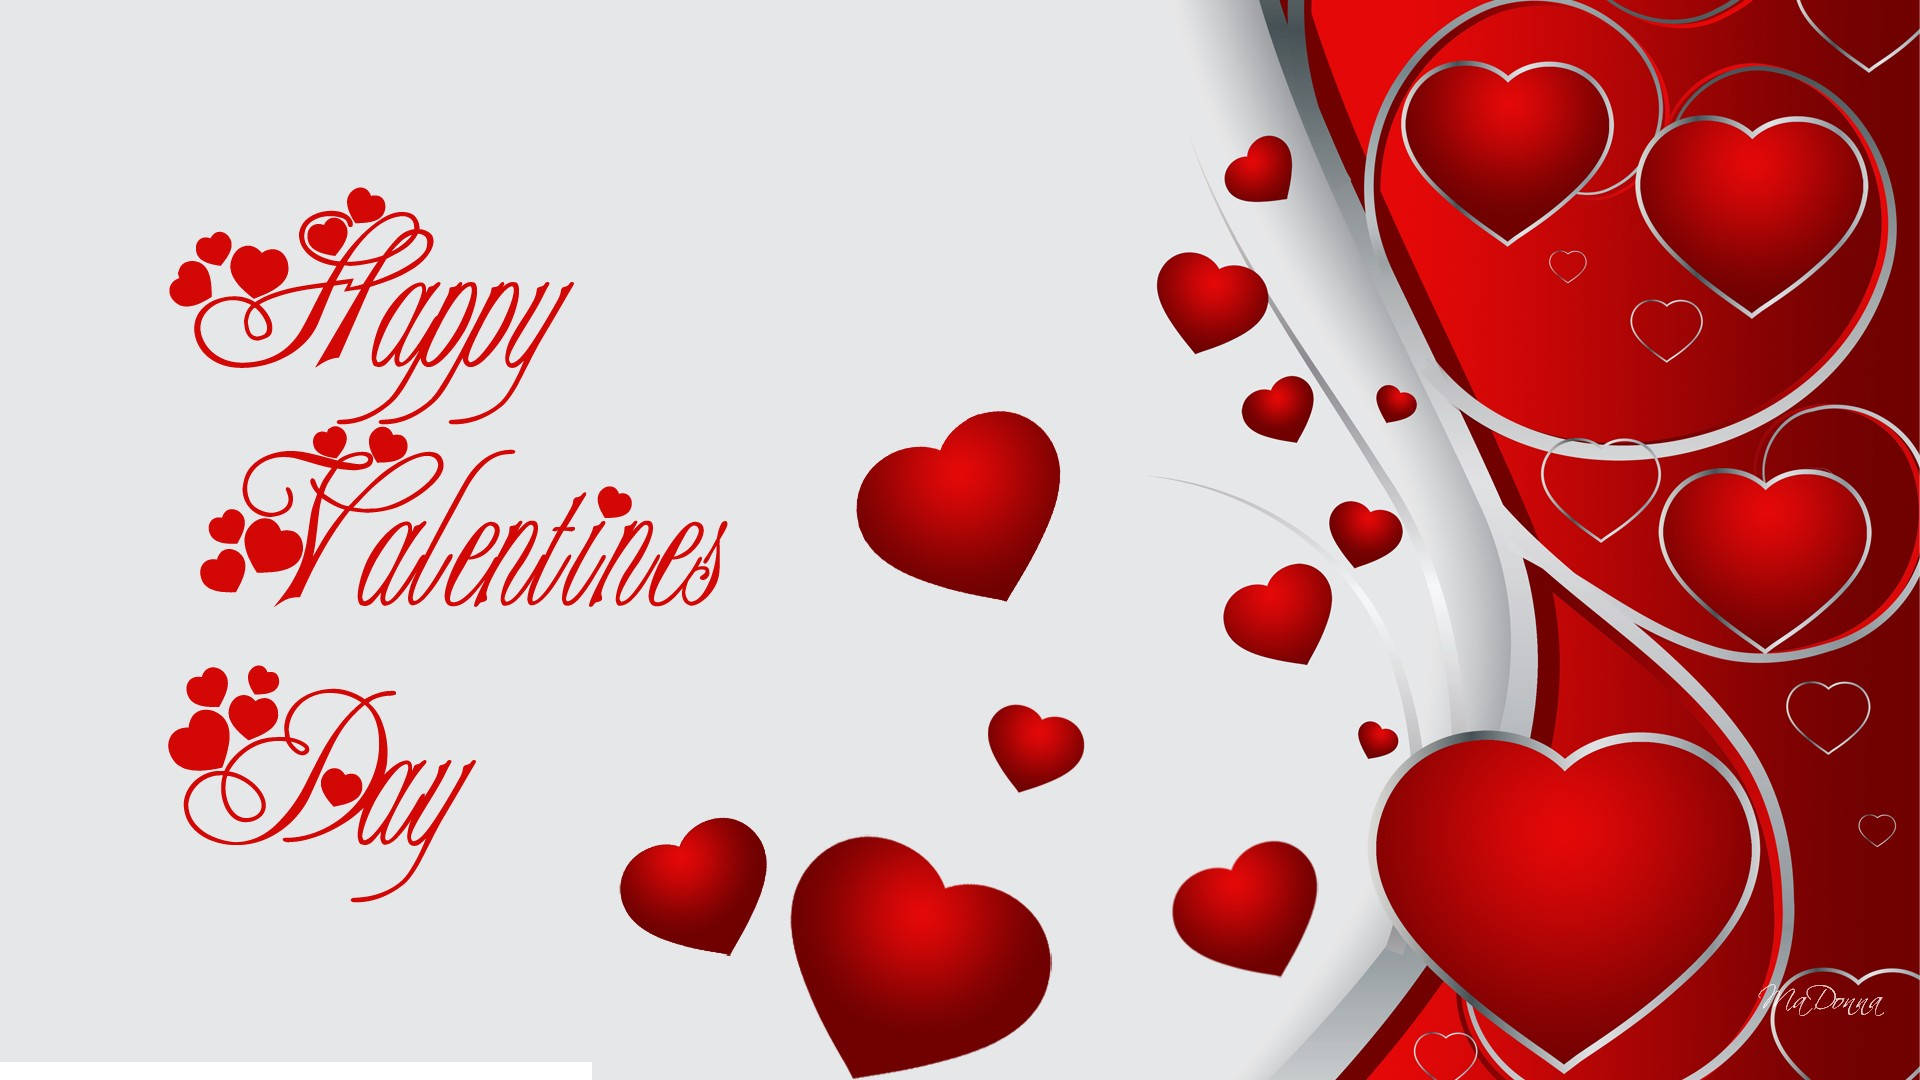 Happy Valentine's Day Ecard With Hearts Wallpaper